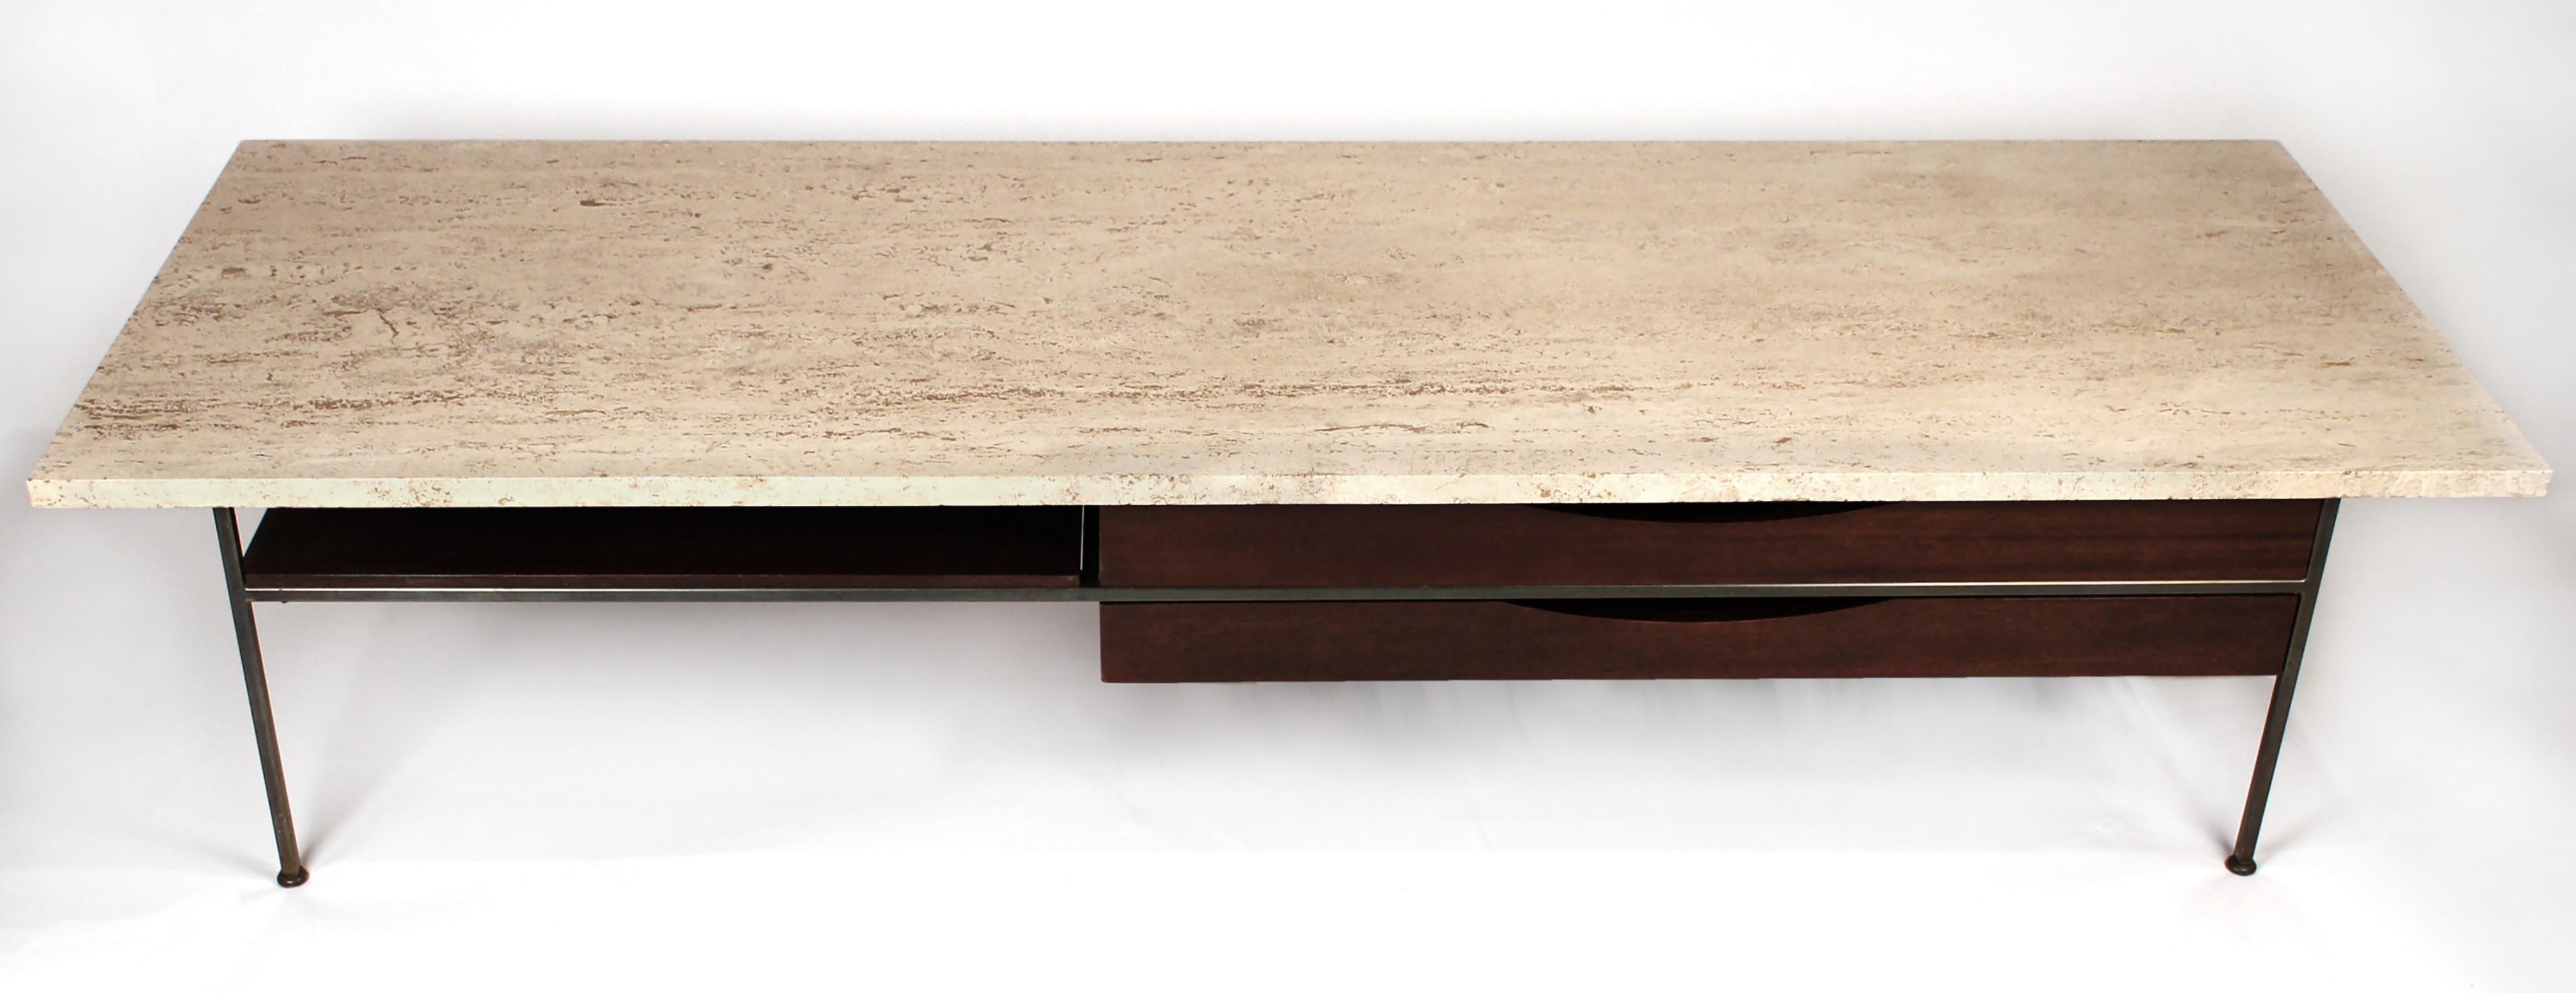 American Coffee Table, Irwin Collection by Paul McCobb for Calvin